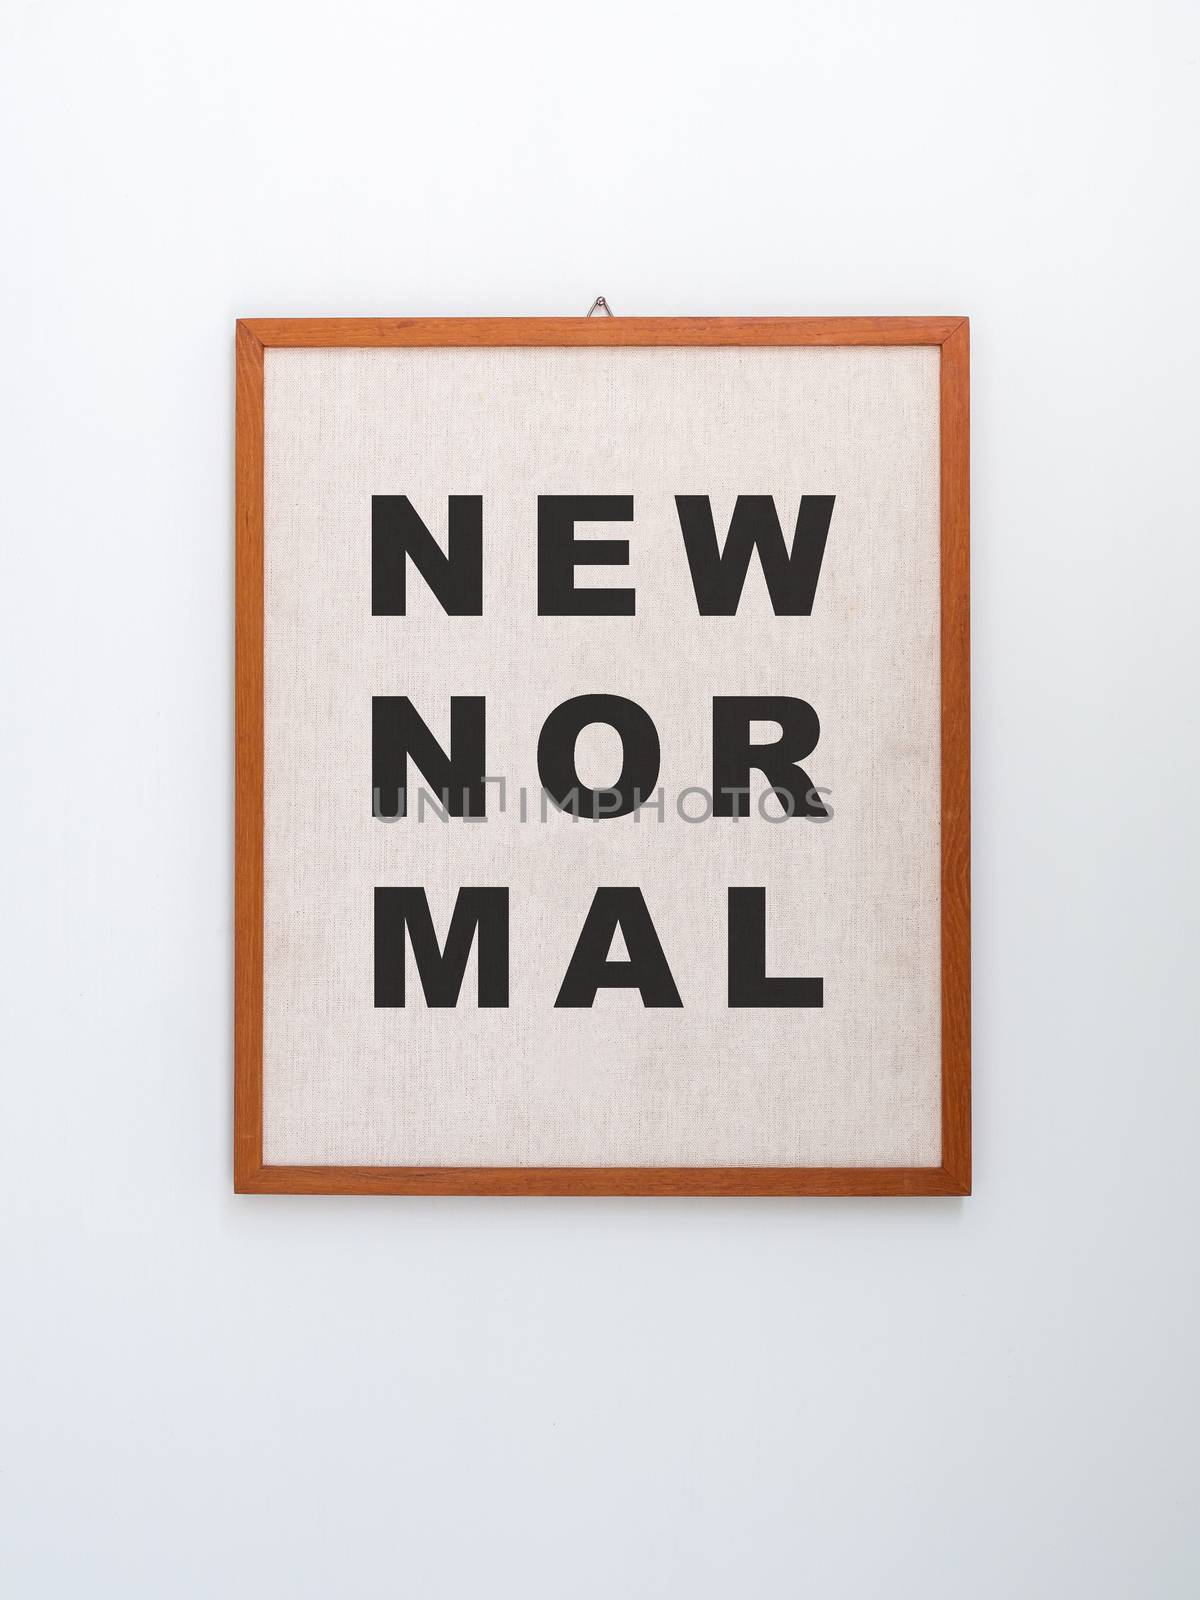 "New normal" word on light brown canvas on hanging wooden frame isolated on white background, vertical style.